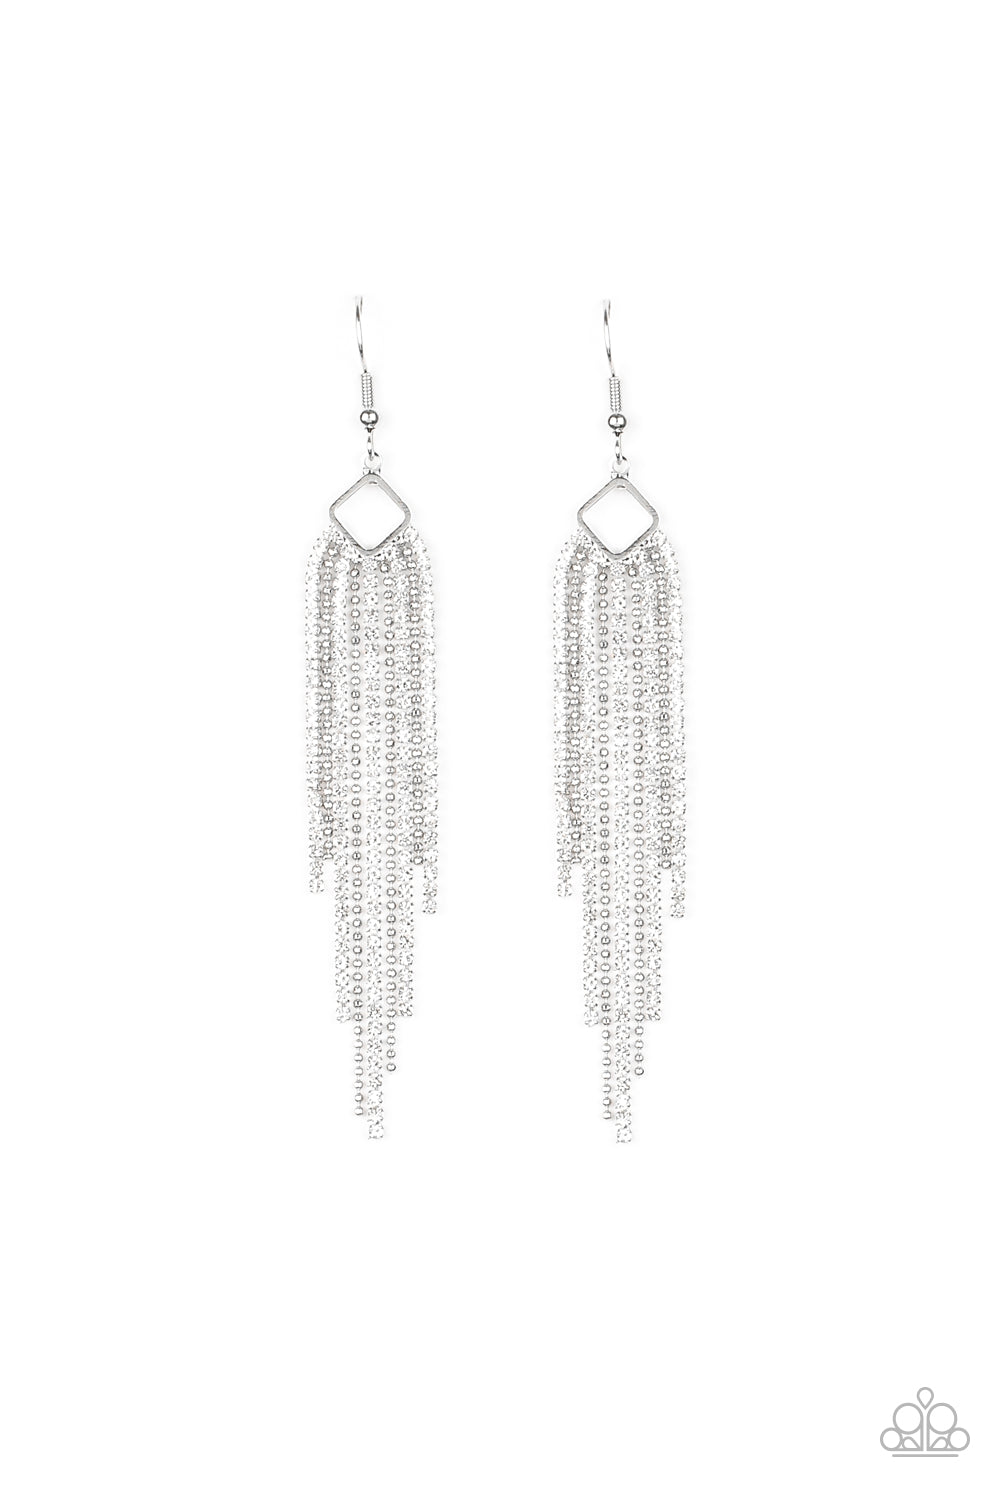 Singing in the REIGN - White - Paparazzi Earring